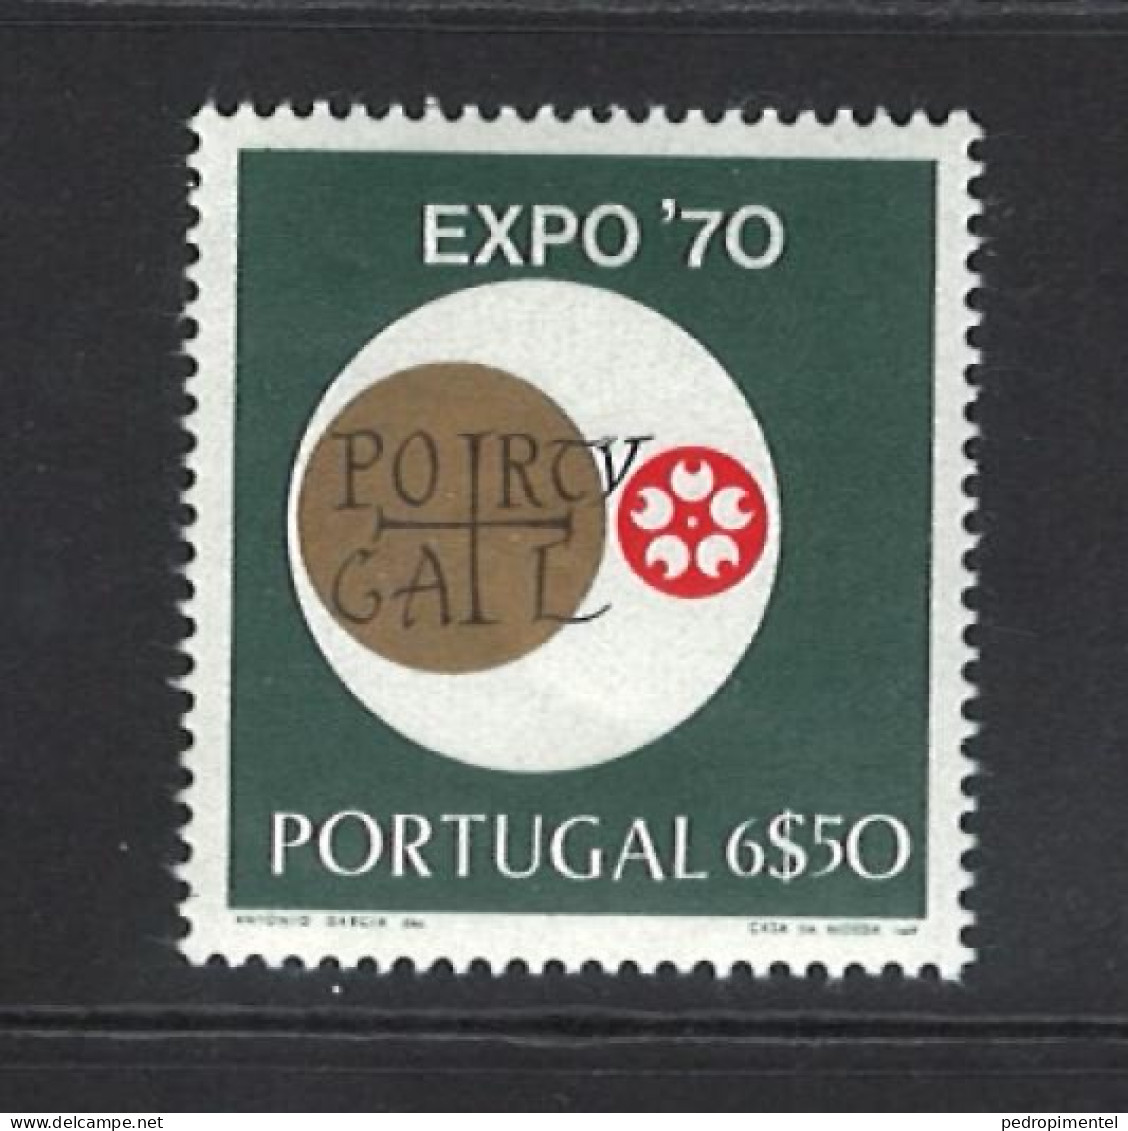 Portugal Madeira 1970 "Expo Osaka" Condition MNH  Mundifil #1078 - Unused Stamps